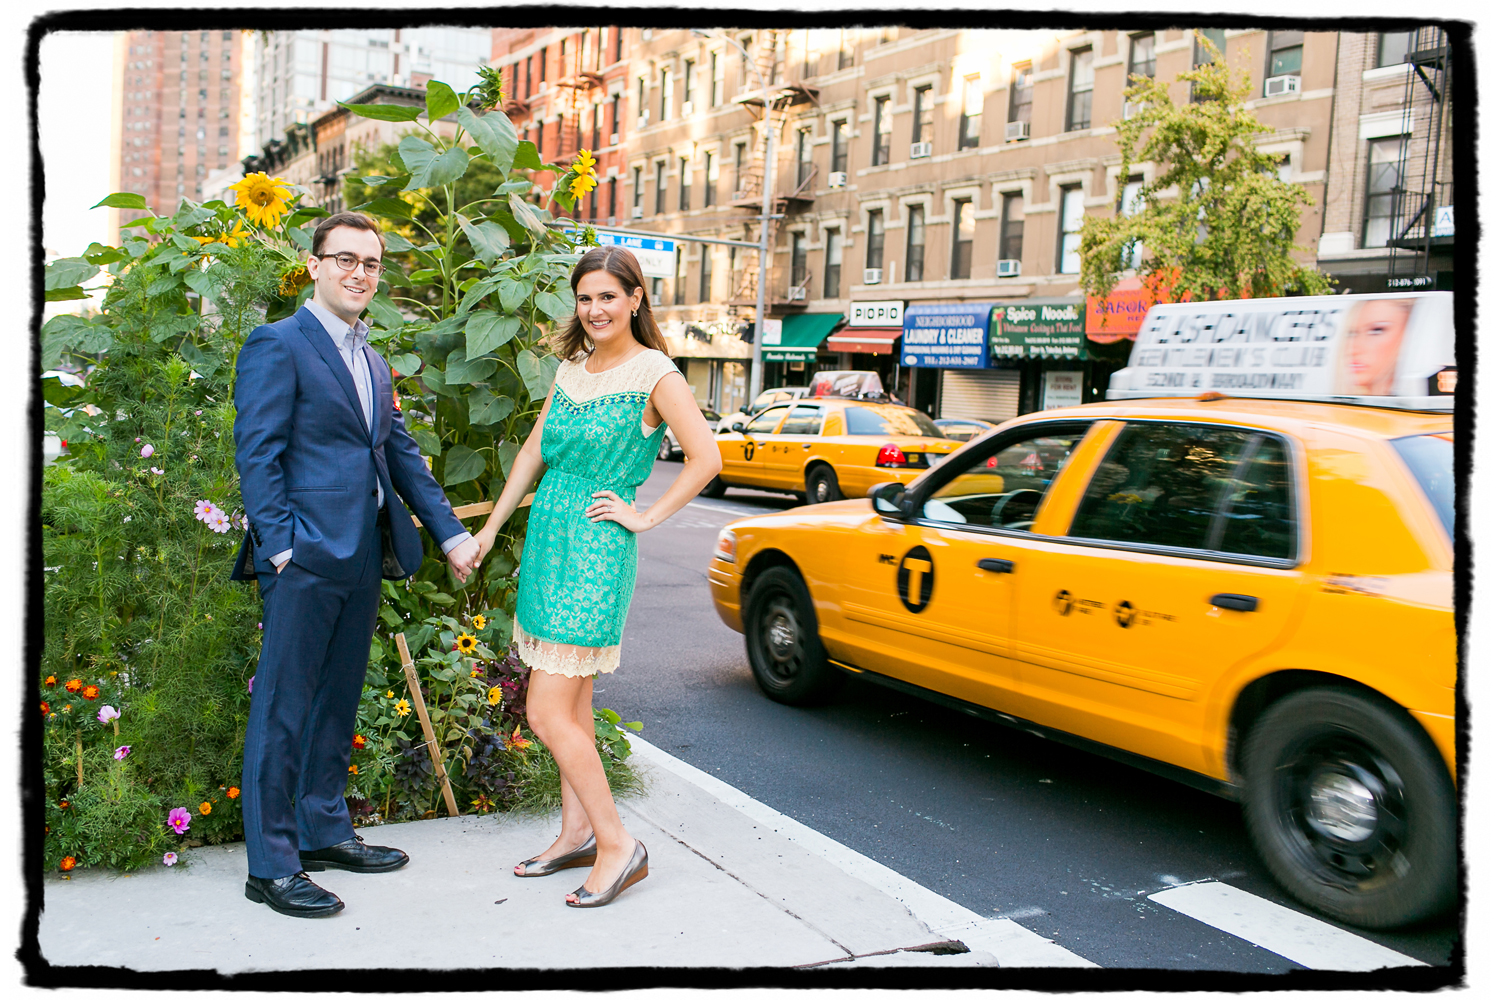 Engagement Portraits: Sarah & Jeff on the Upper East Side.